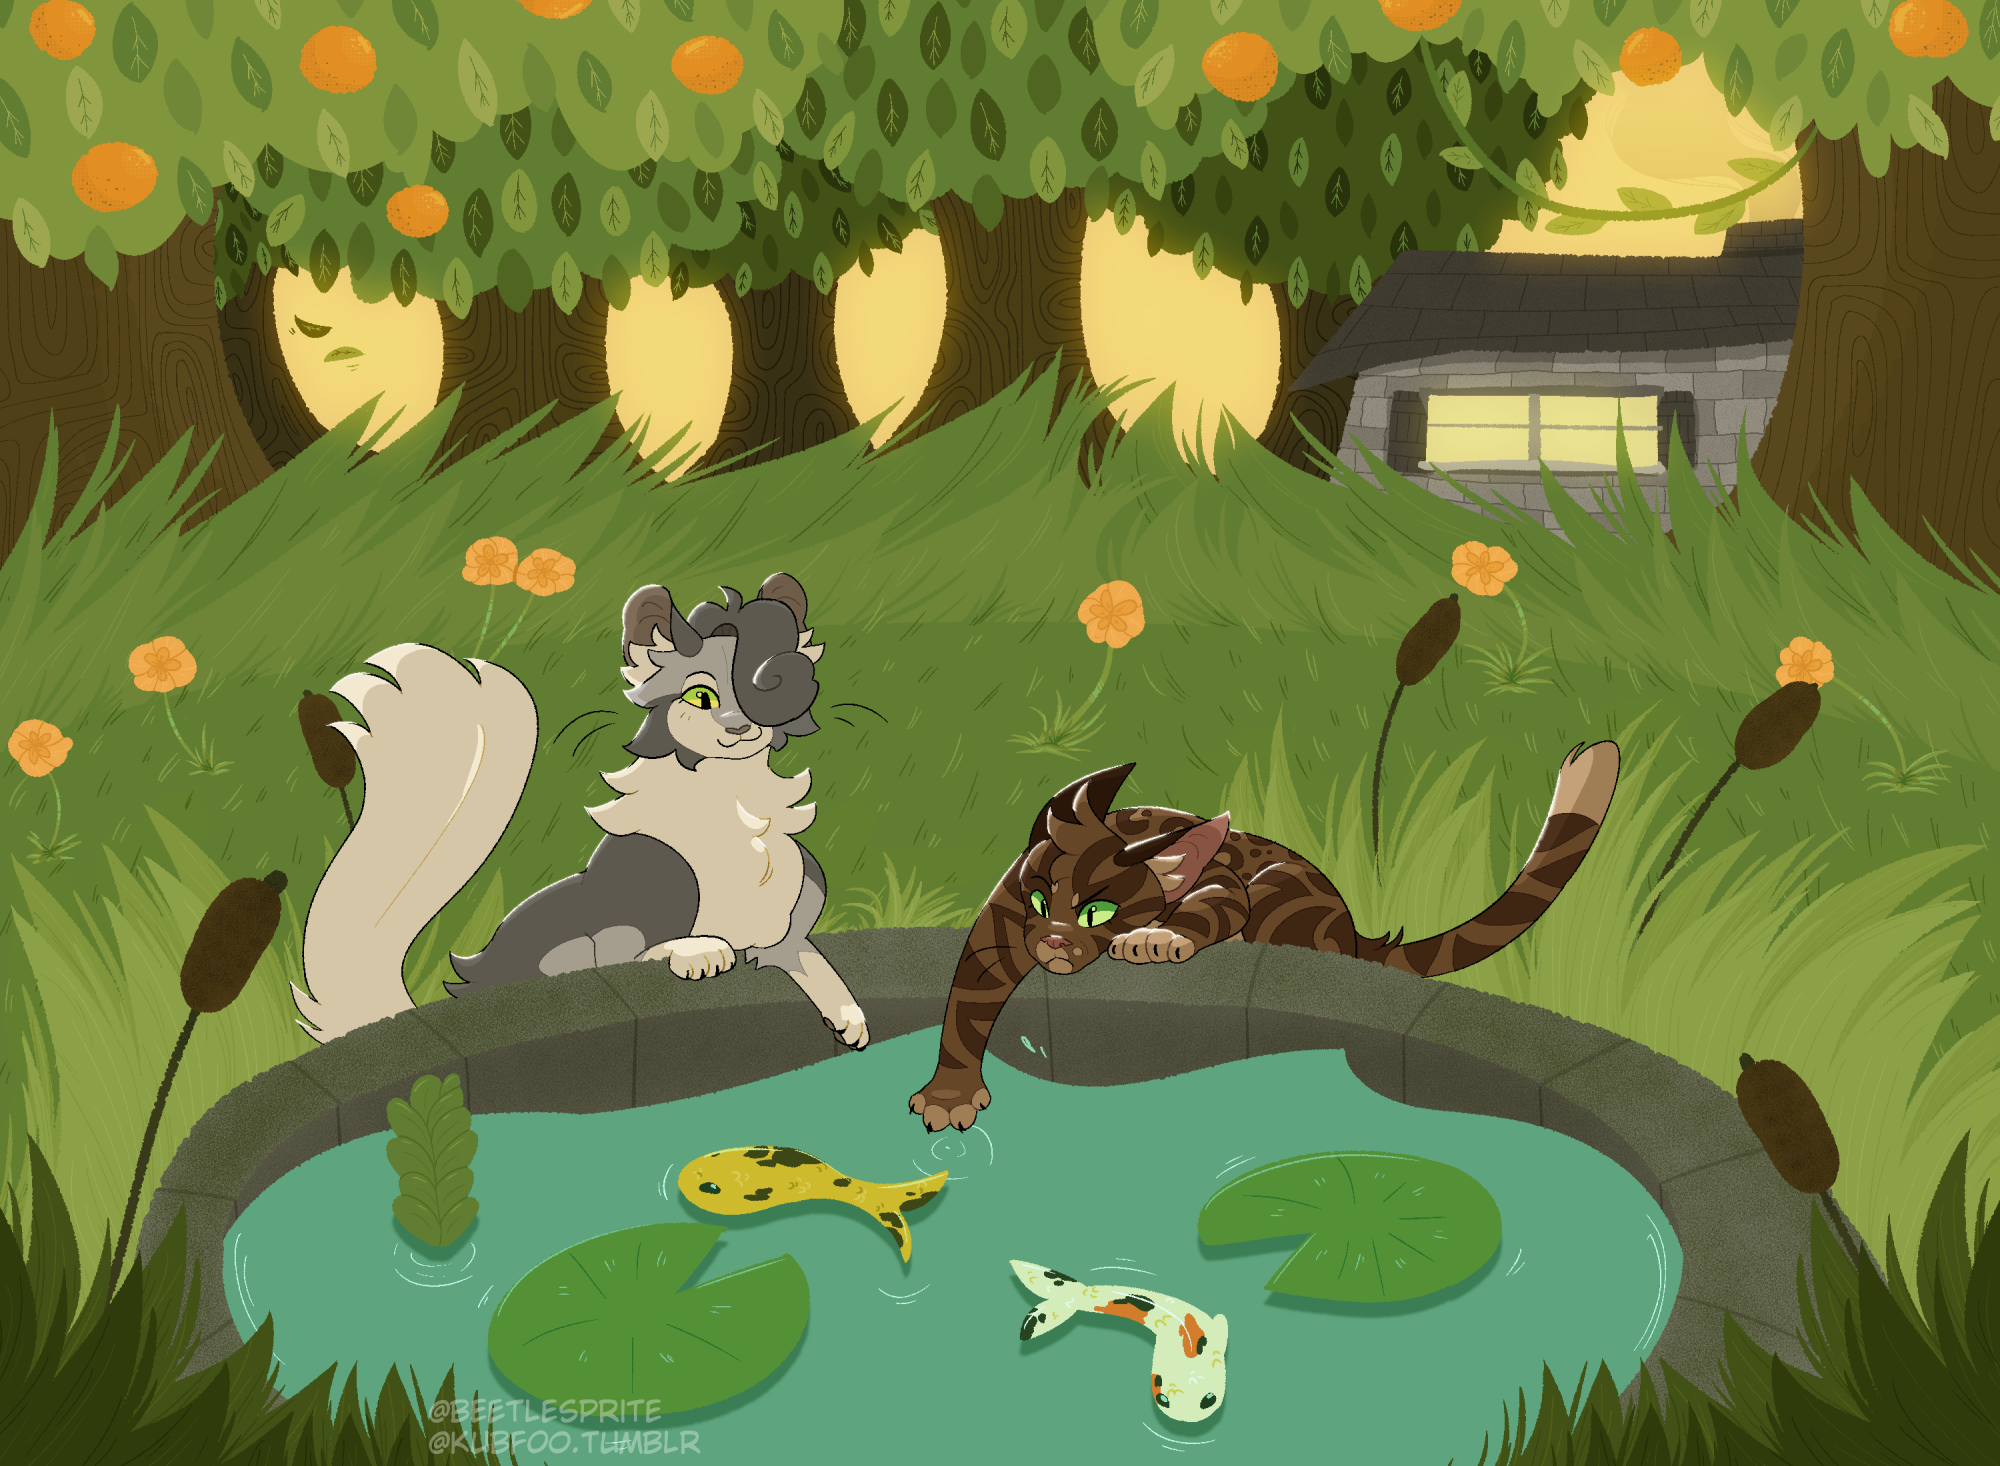 A digital drawing of two cats fishing koi out of a man-made pond in the middle of a forest. One cat, Juniperpaw, is a gray tabby. She smiles as she dabs a paw at the water. The other cat, Applepaw, is a brown tabby. He is reaching his entire arm into the pond, trying to get at the fish. In the background are orange-bearing trees and a house with smoke rising from the chimney. It's daybreak.